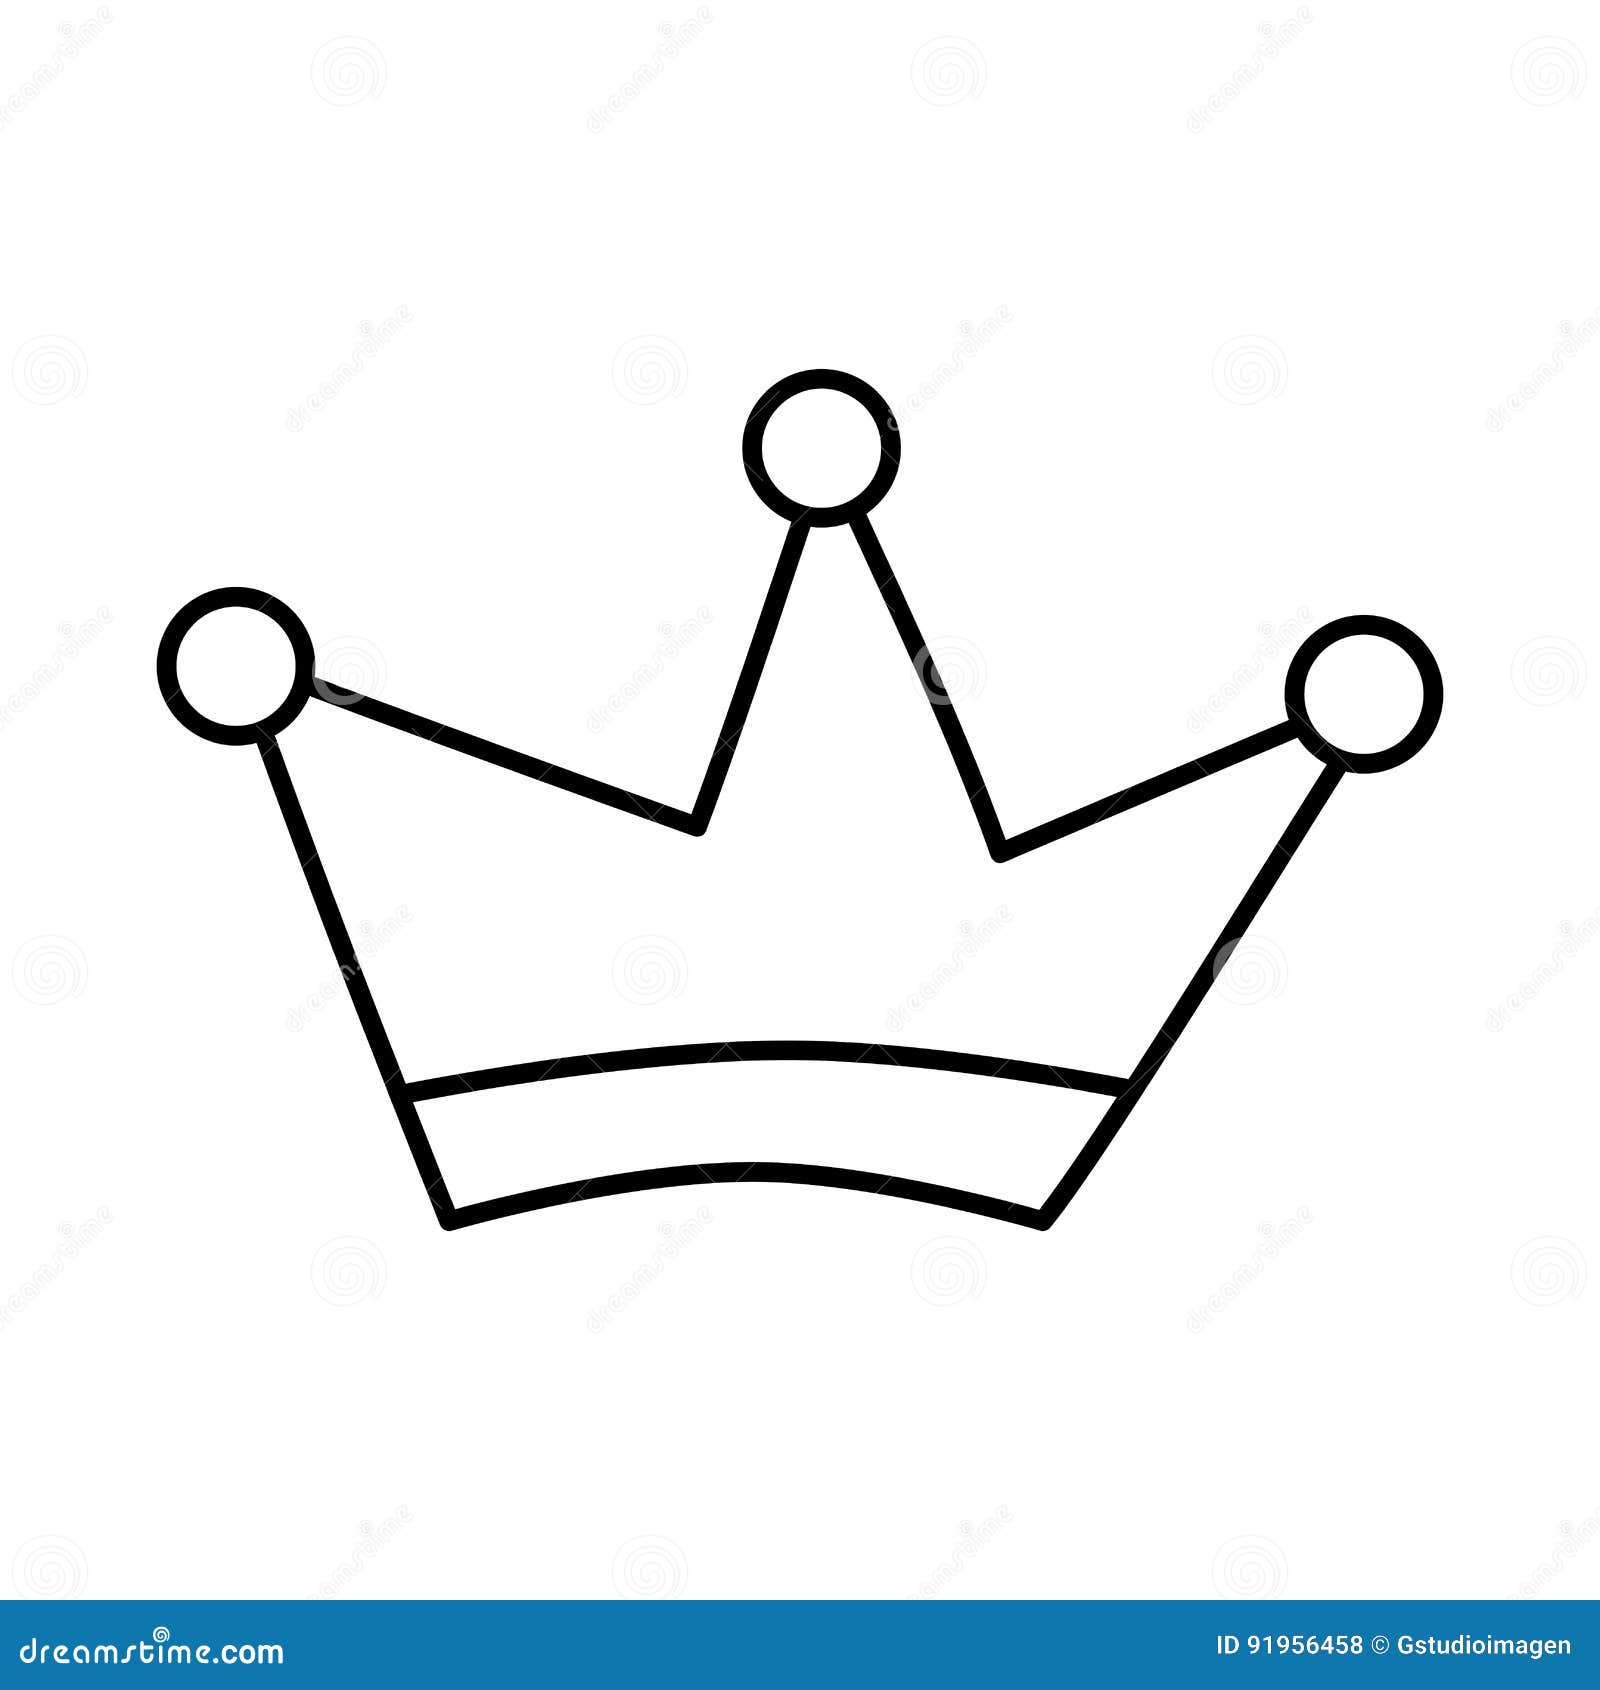 Sketch Crown Simple Graffiti Crowning Elegant Queen Or King Crowns Hand  Drawn Vector Illustration Stock Illustration - Download Image Now - iStock